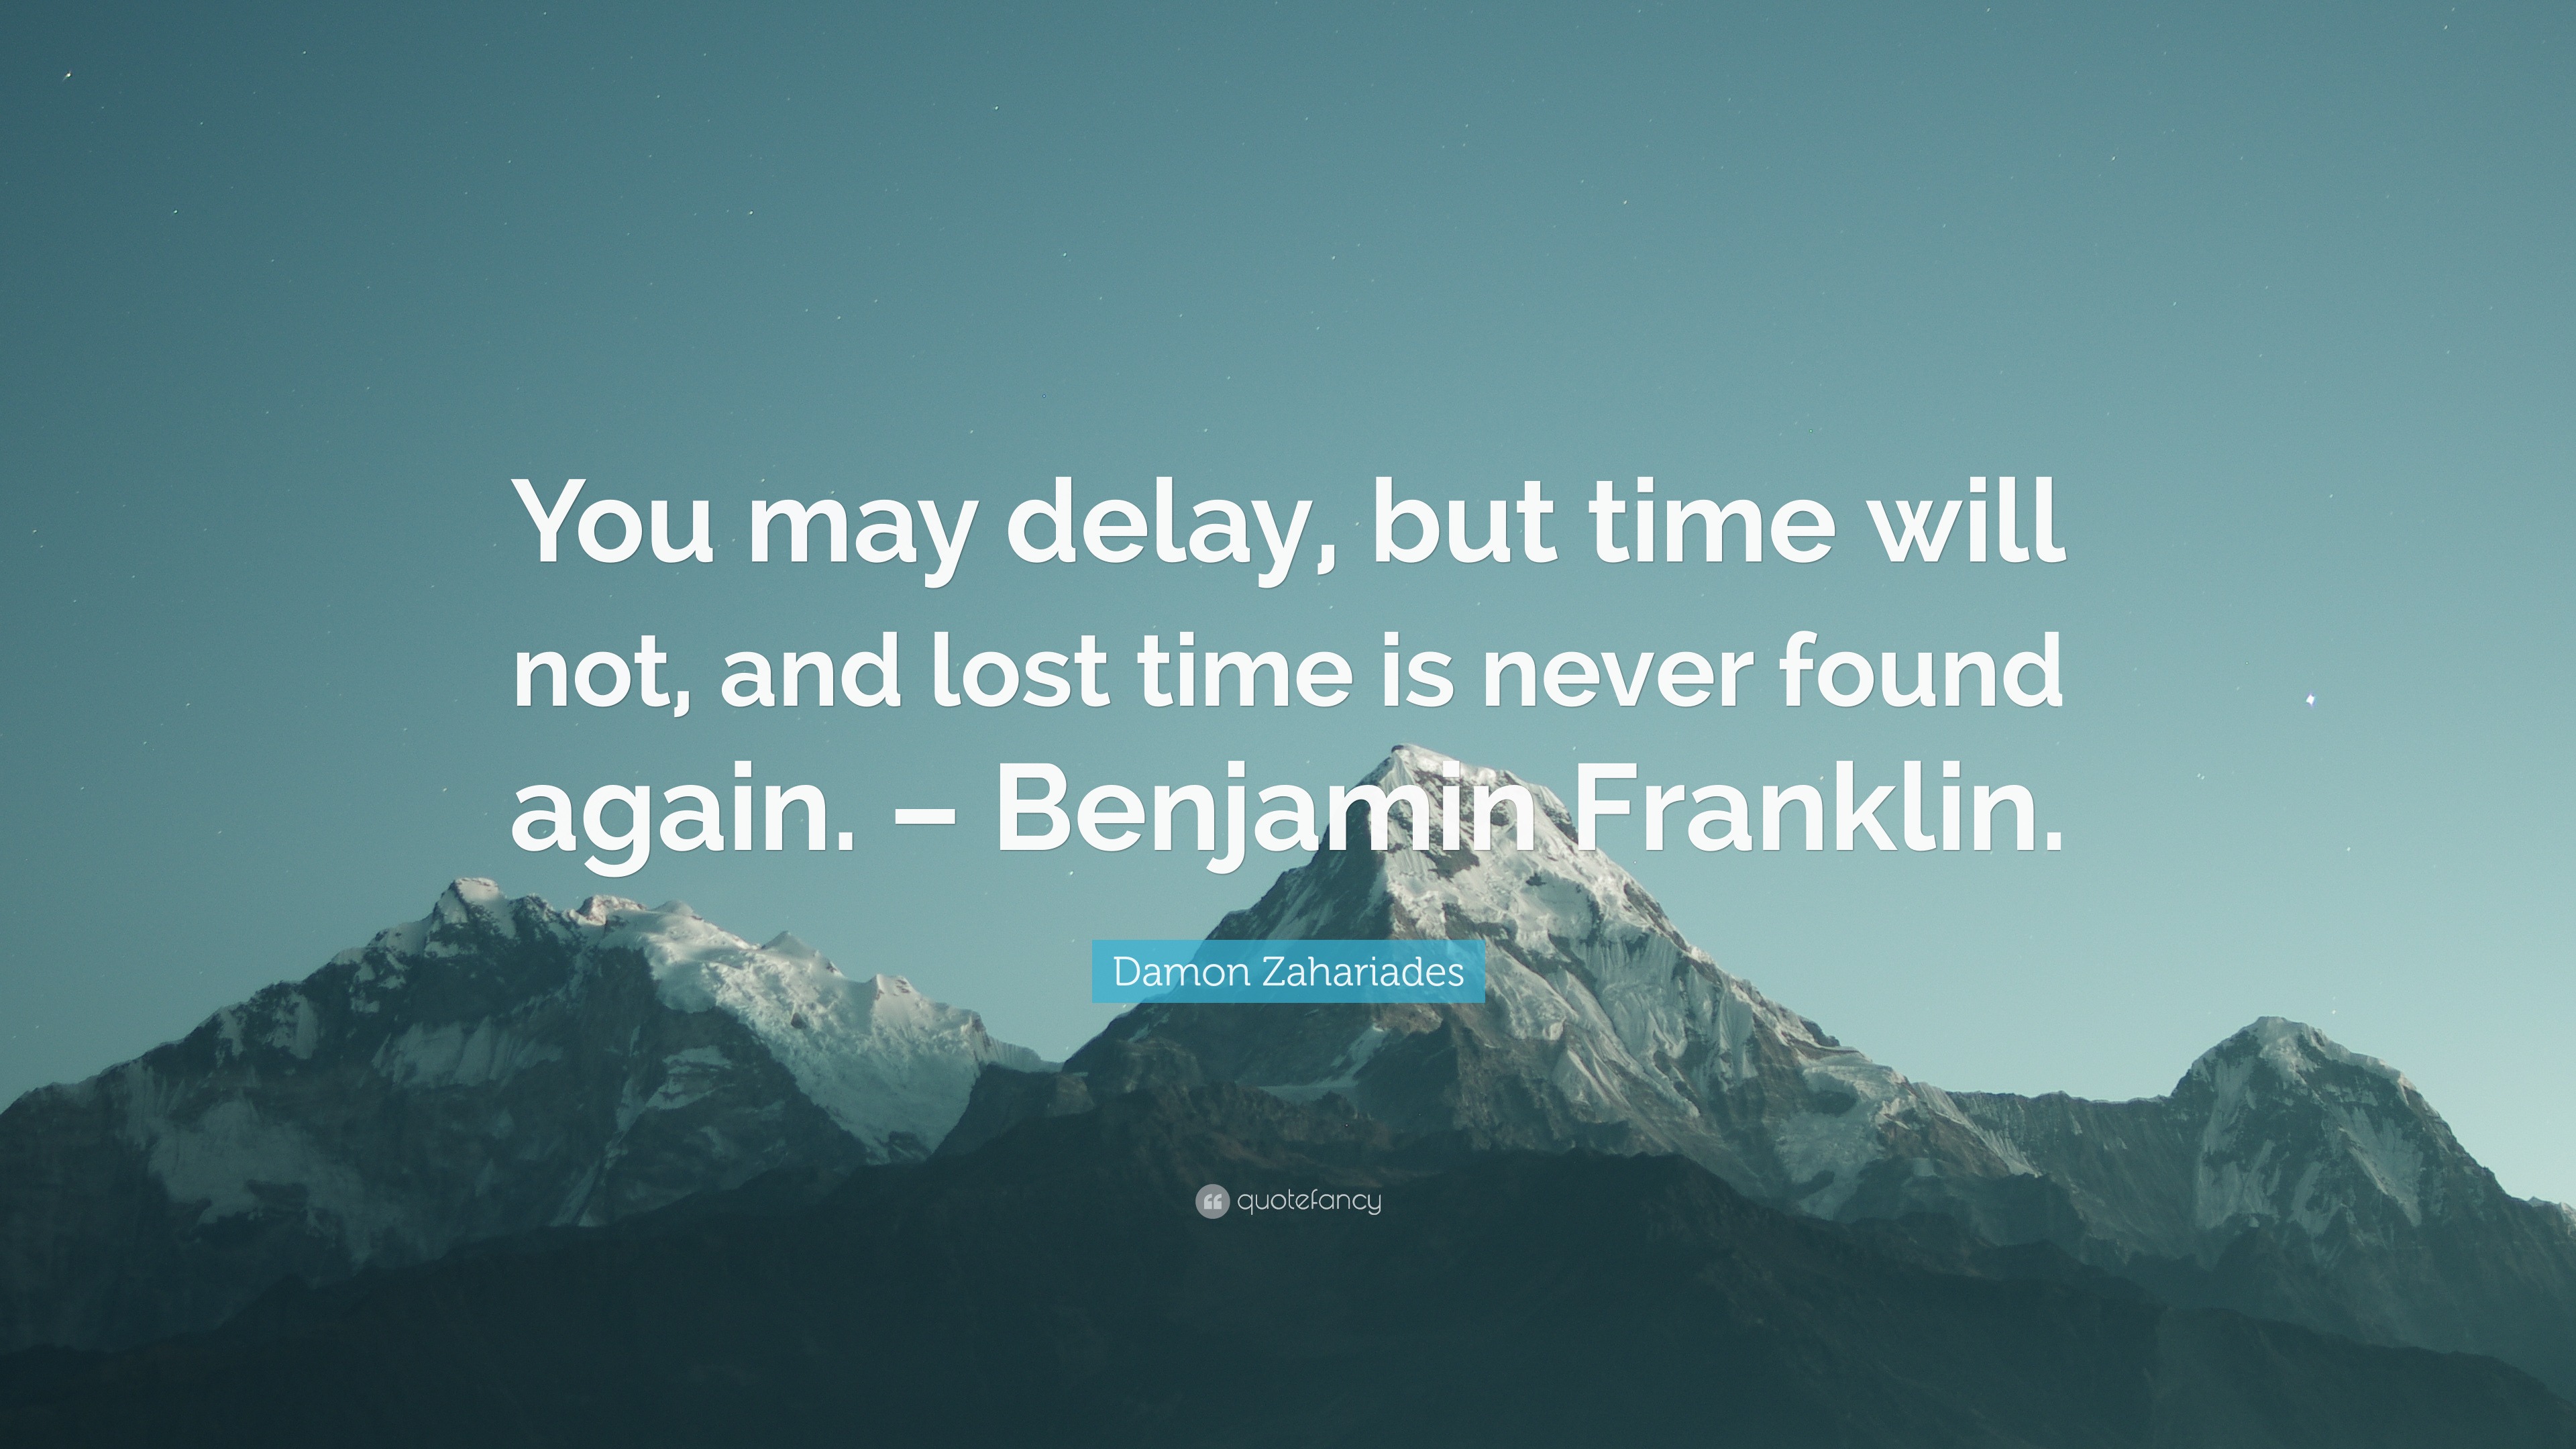 Damon Zahariades Quote: “You may delay, but time will not, and lost time is never  found